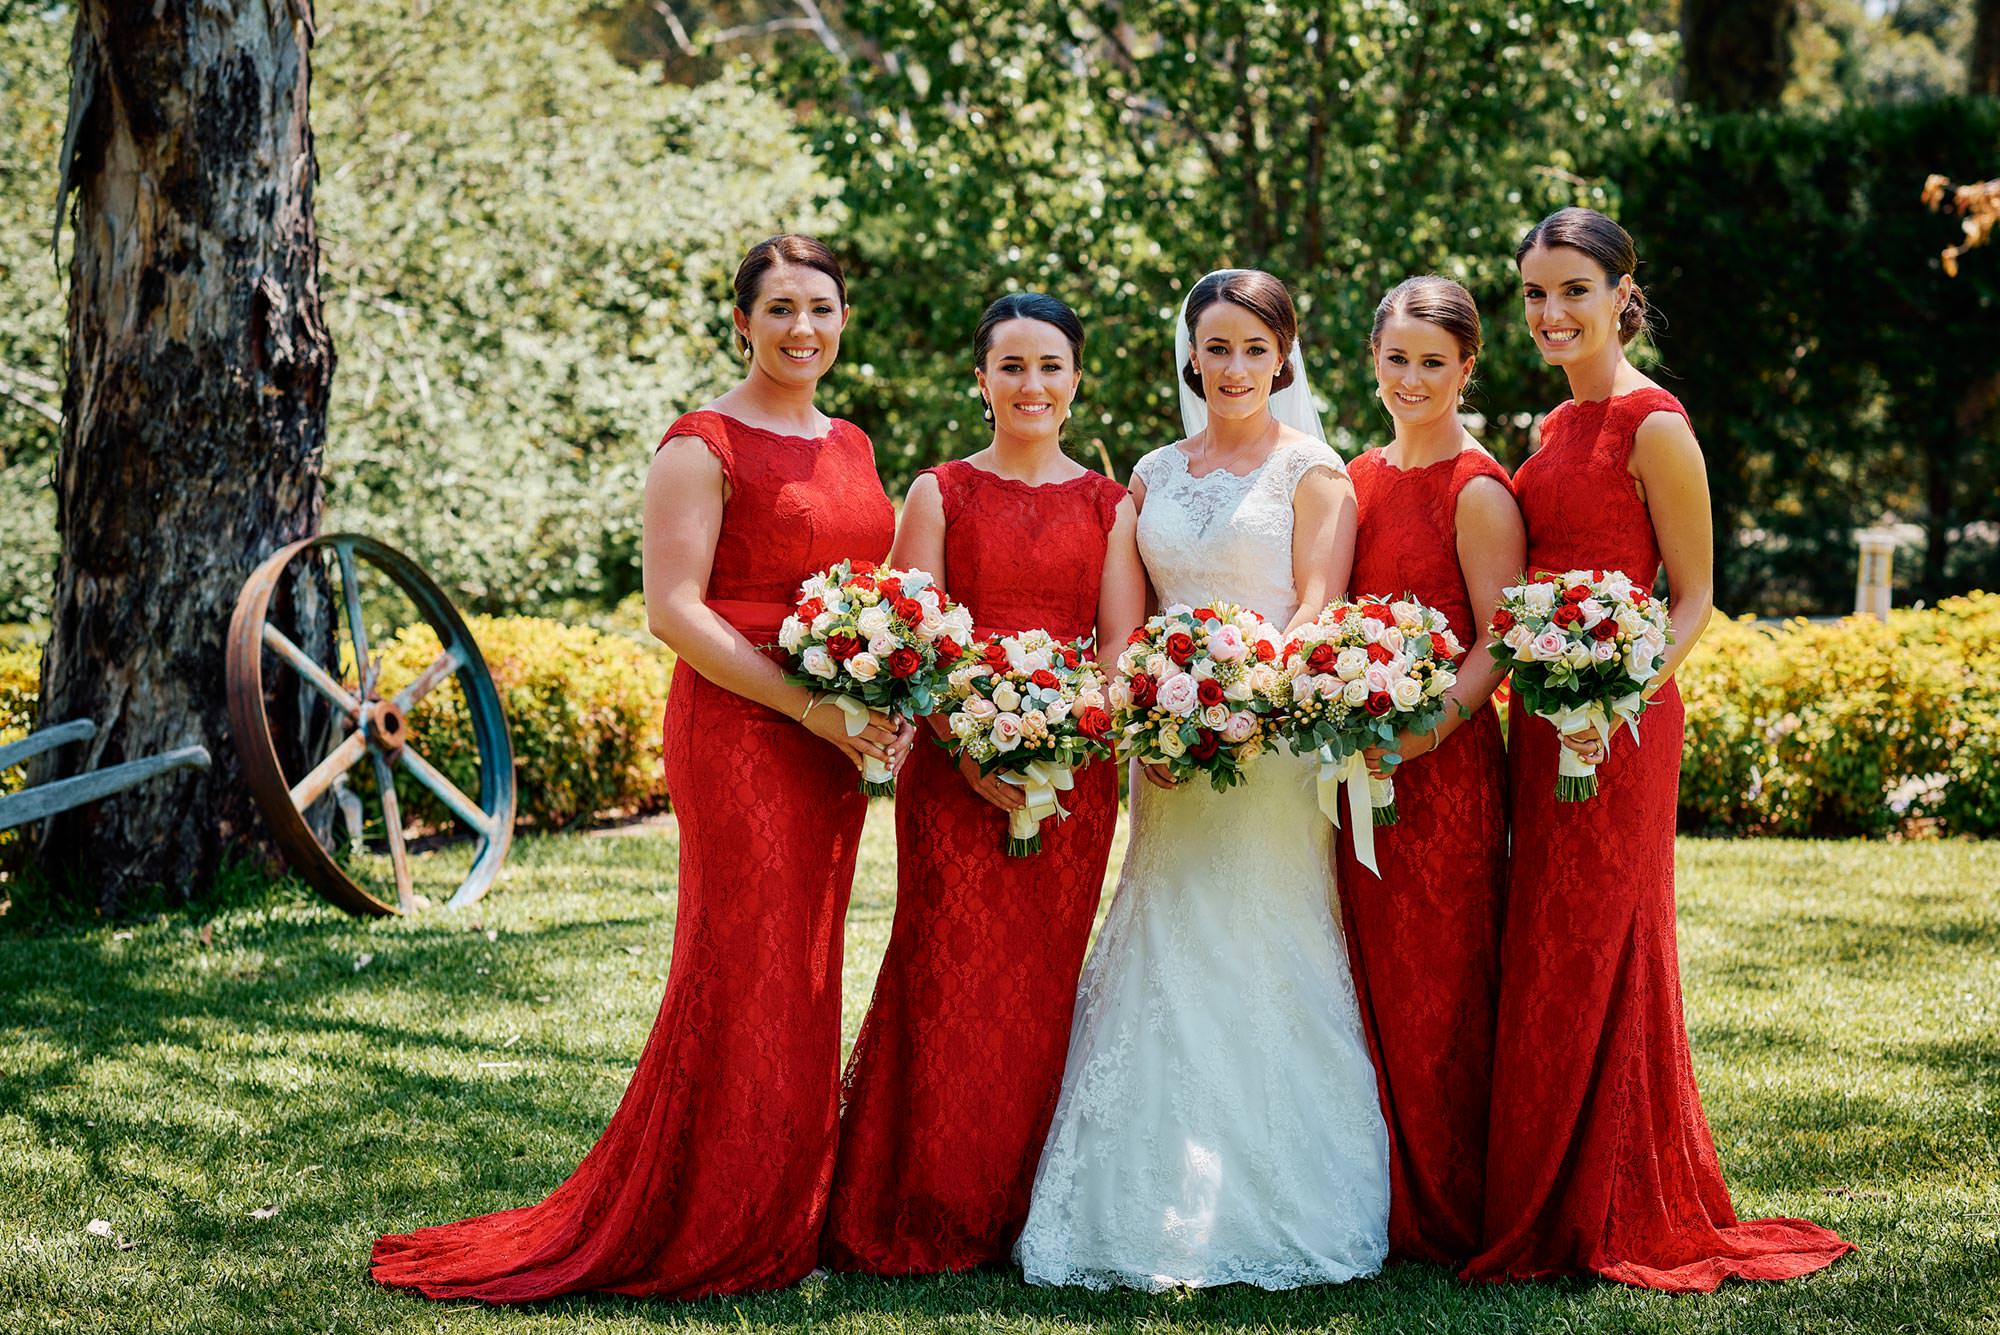 Bride with bridesmaids before leaving for wedding